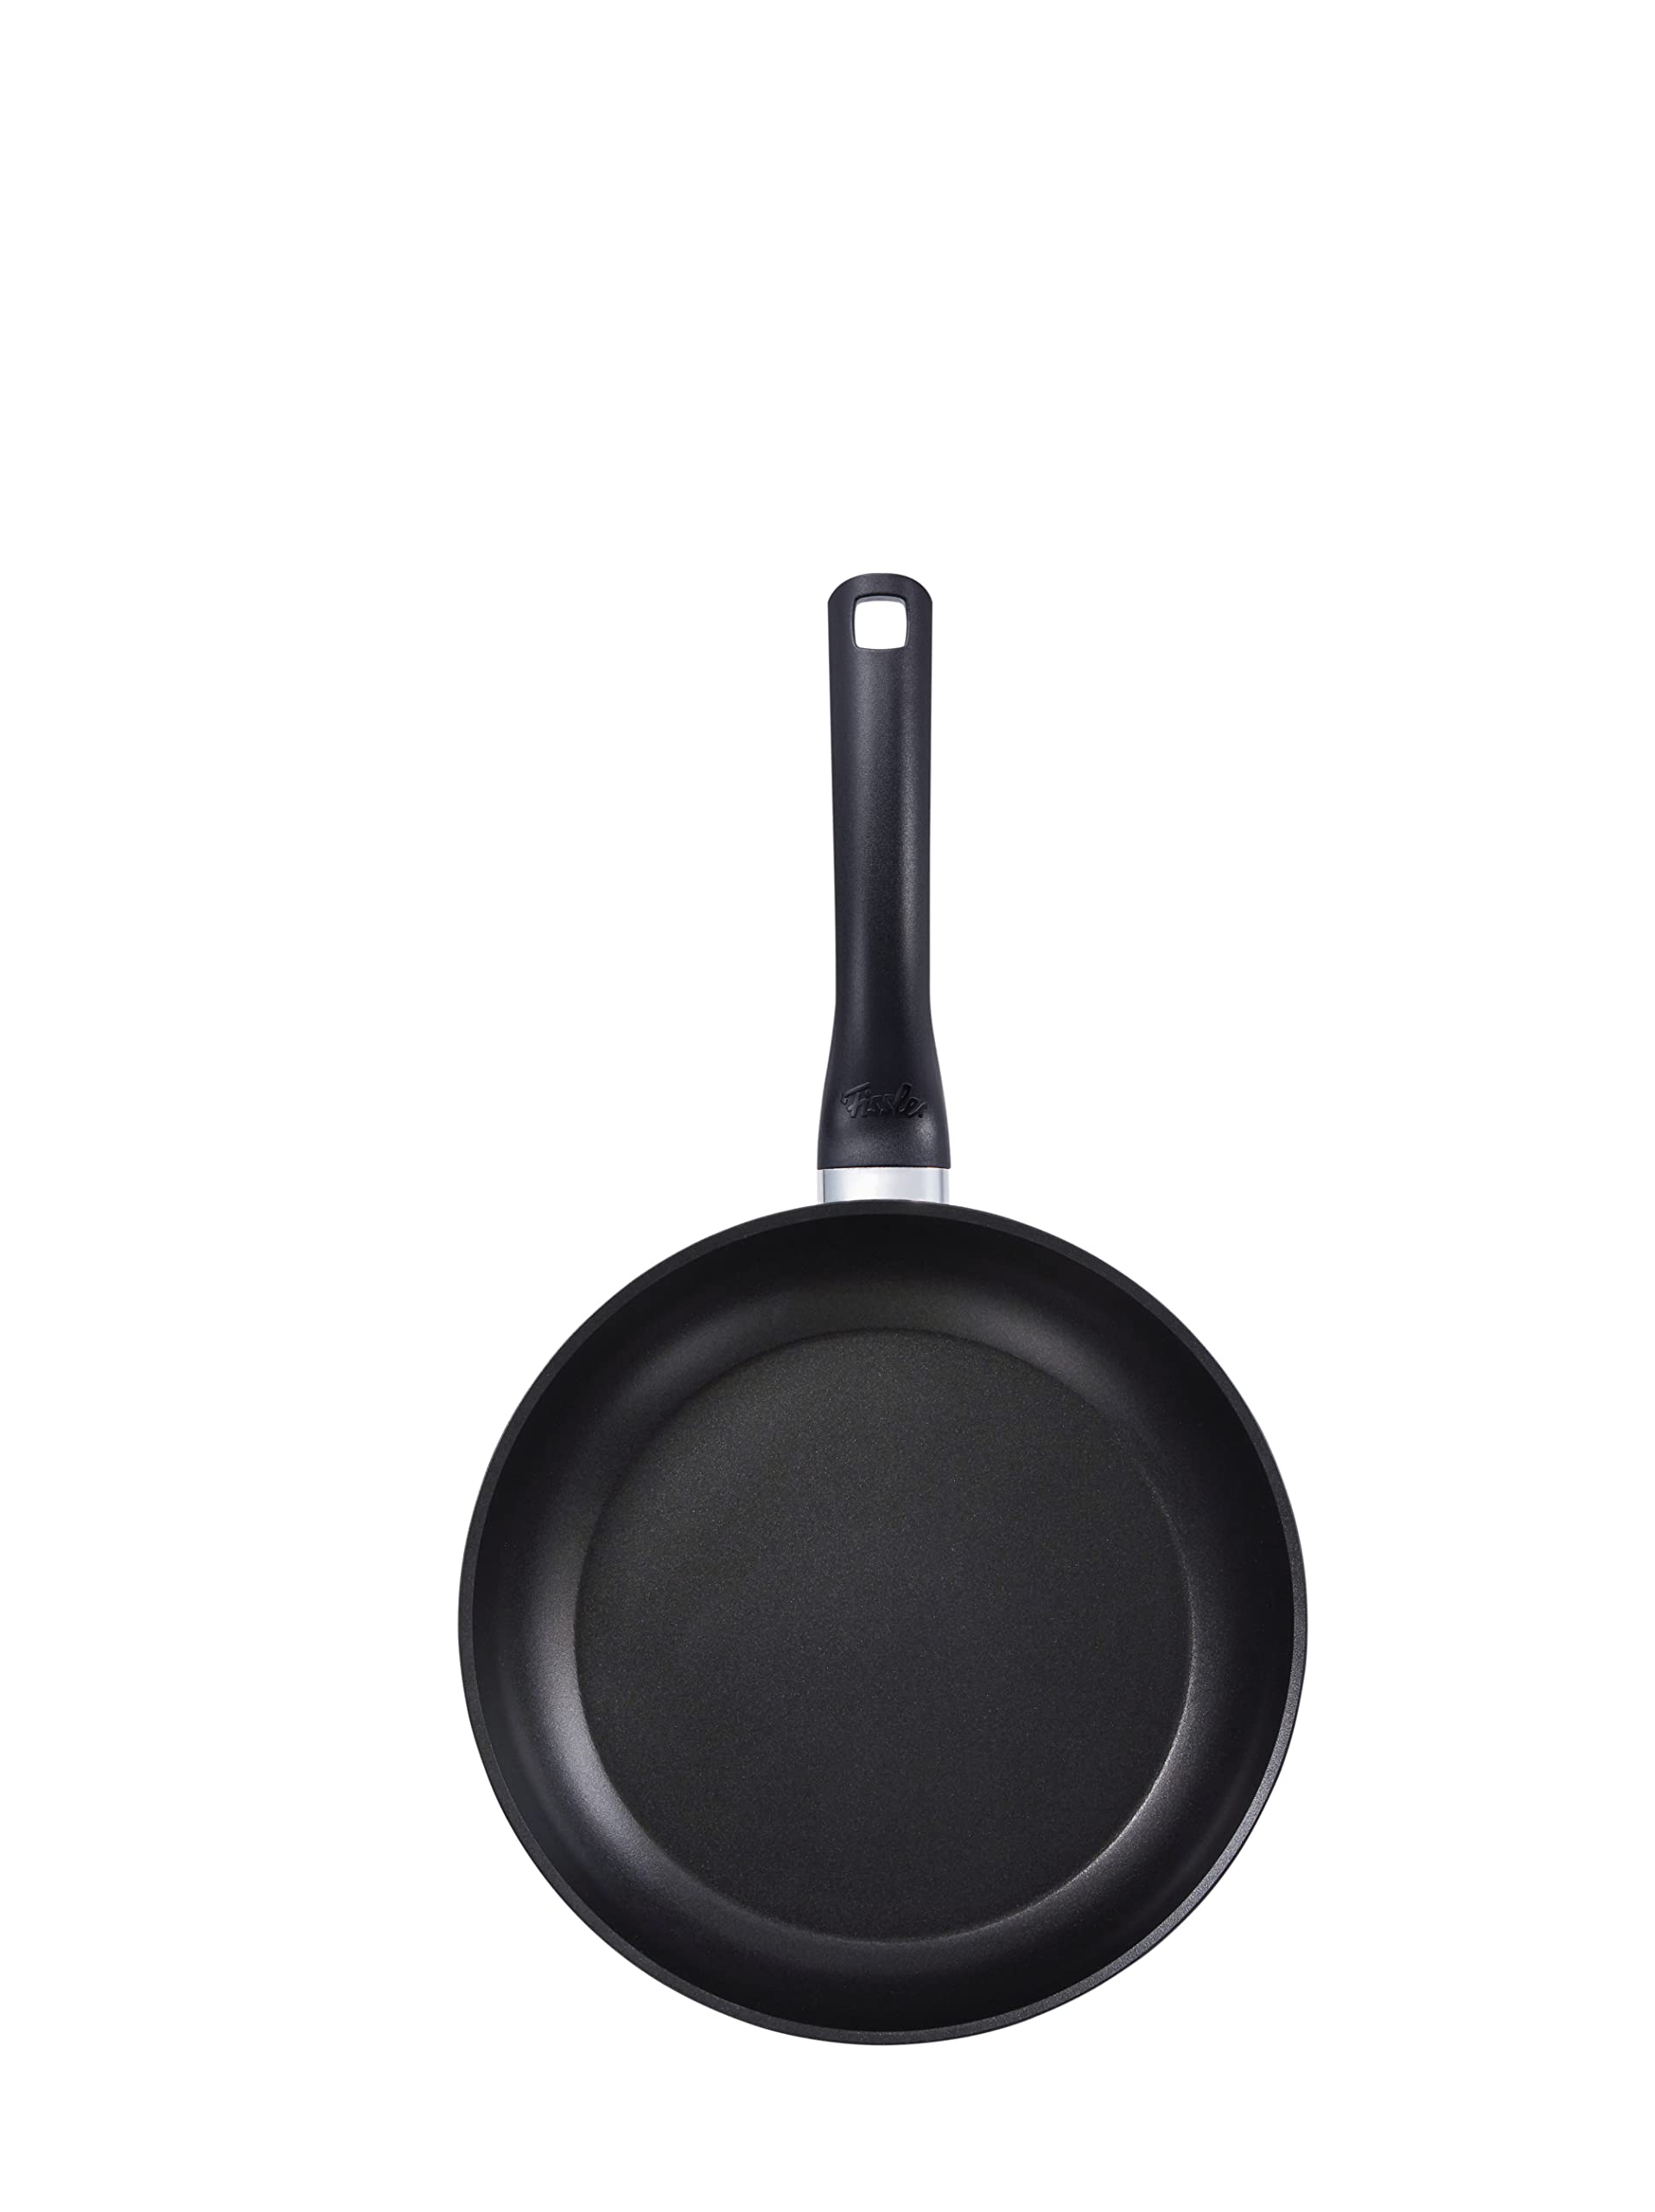 Fissler Cenit/Aluminum Pan (9.5") Coated Frying Pan, Non-Stick, all types of stoves - also induction